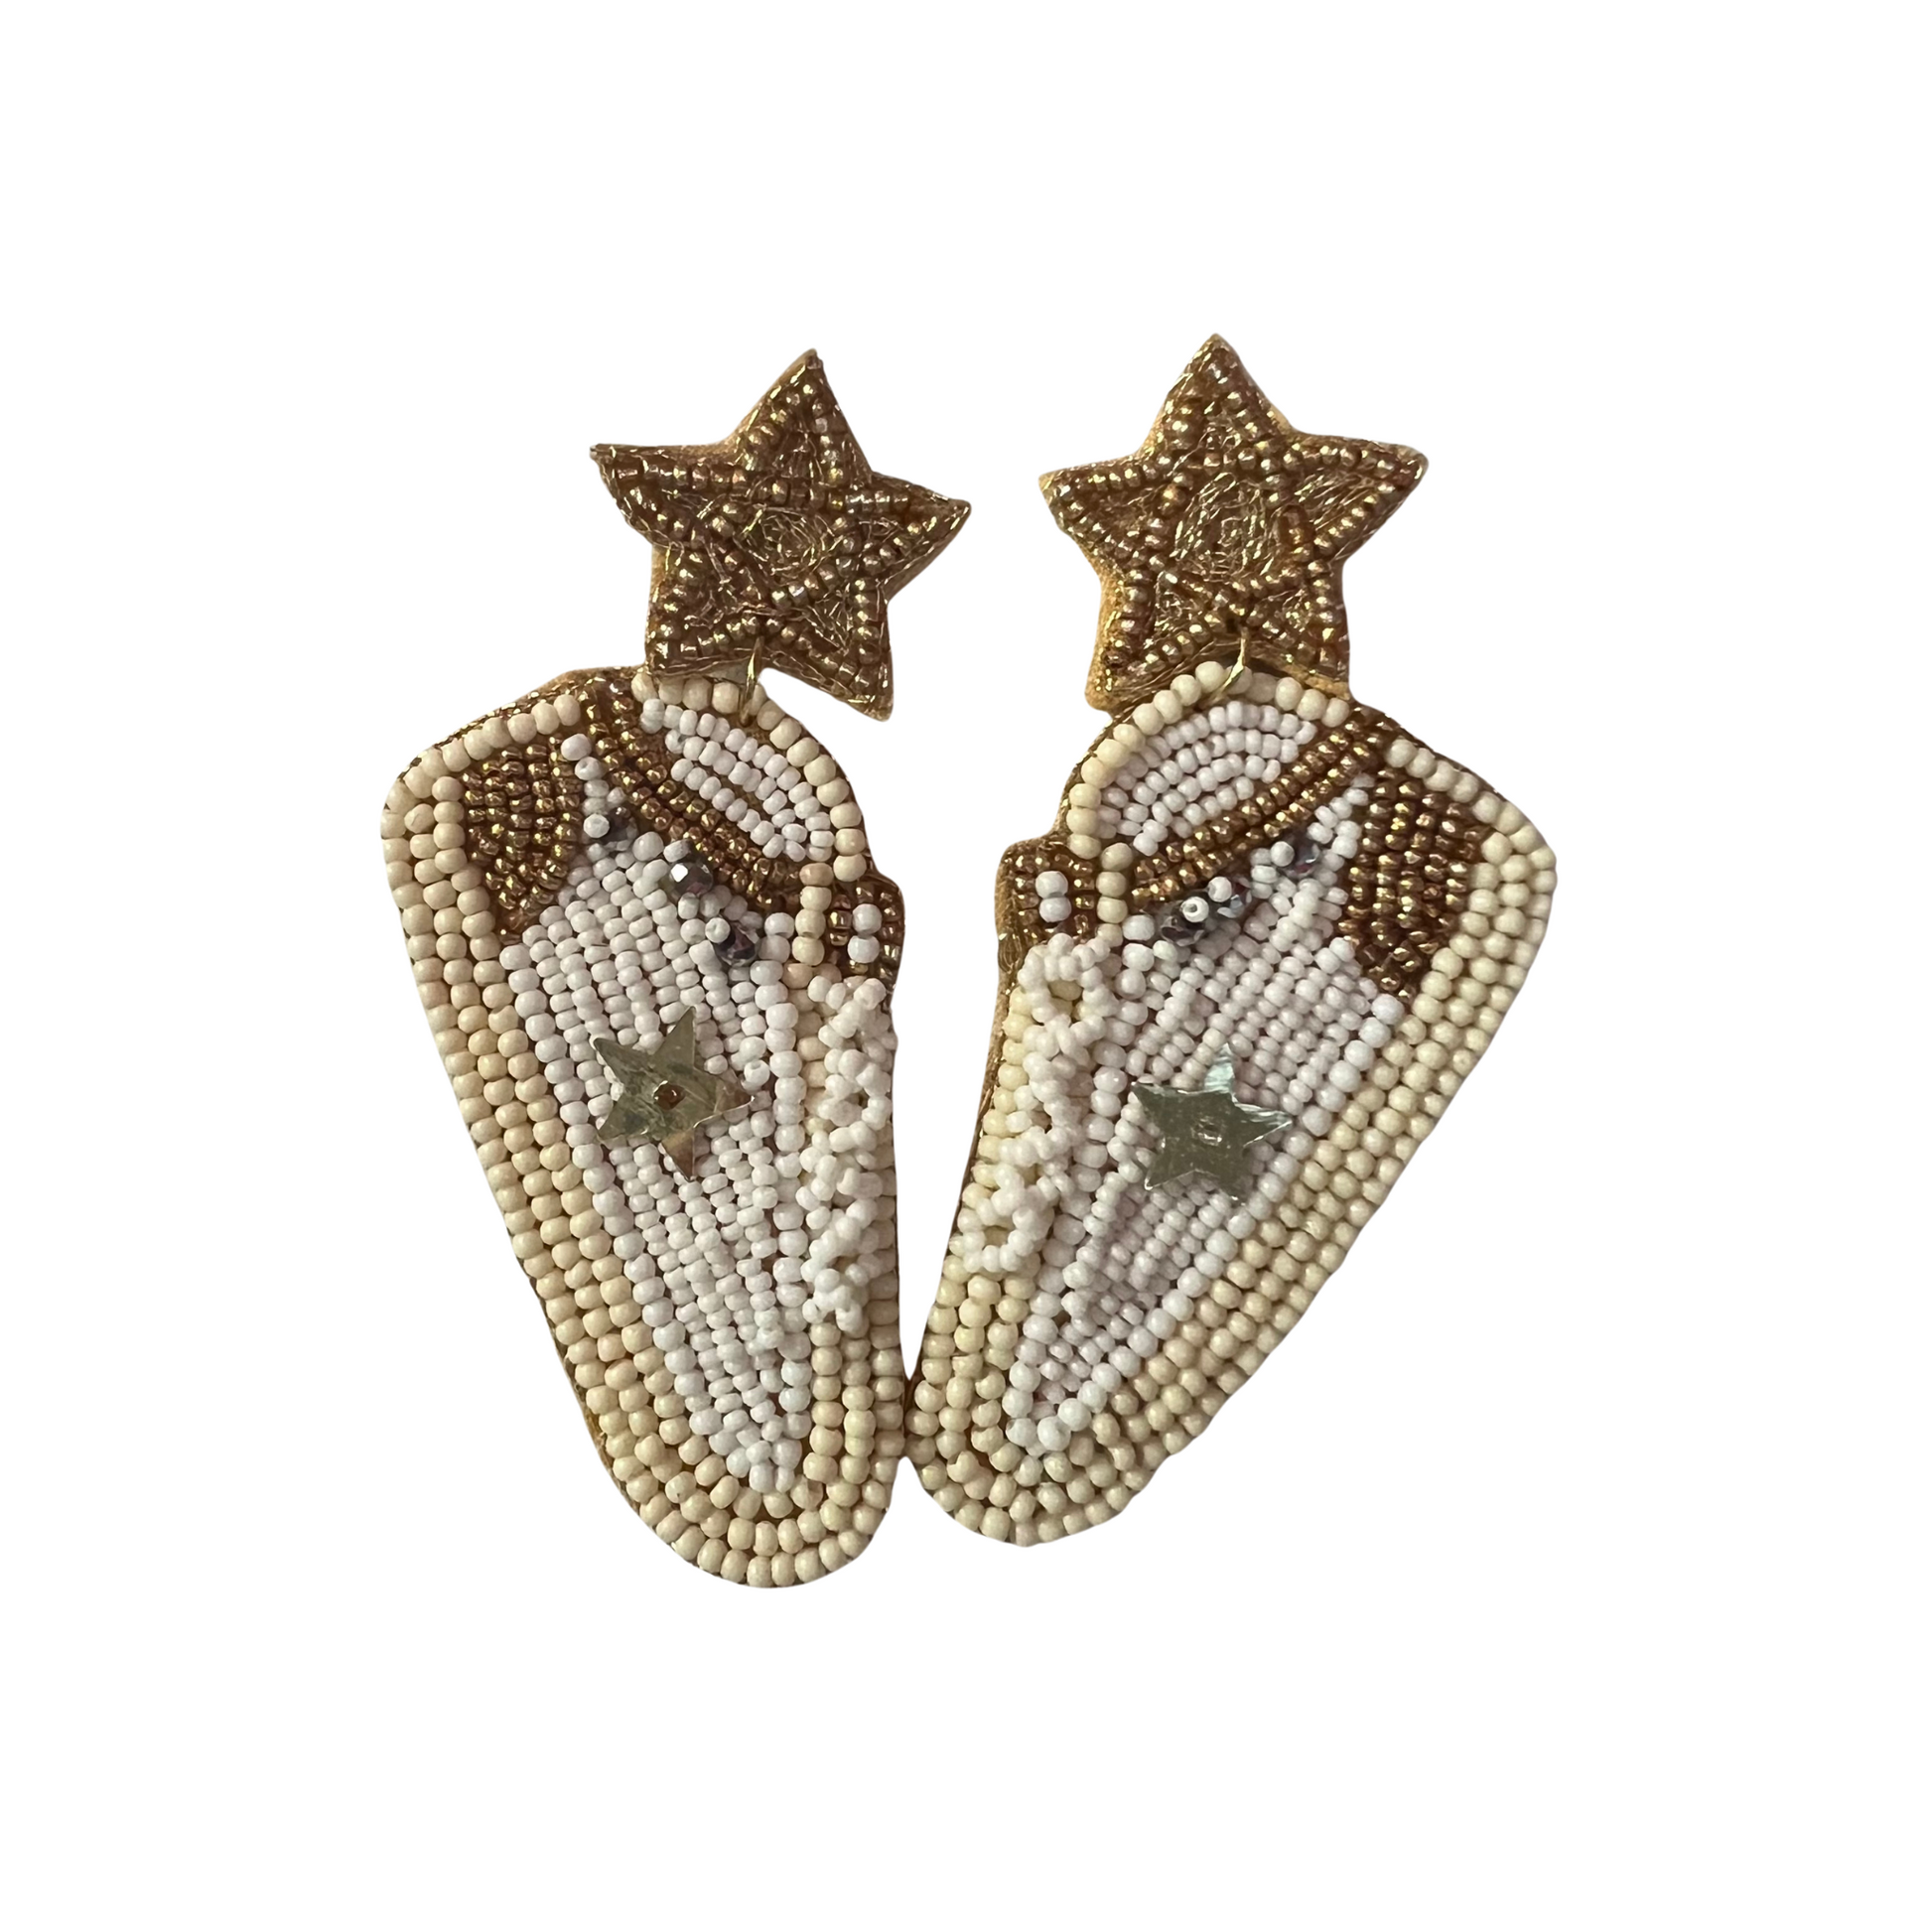 Adorn yourself with these exclusive Converse-inspired earrings. In classic black and pink or gold and white, they feature beaded shoes that will inject a fashionable edge to any ensemble. Show your unique style with these trendy earrings.